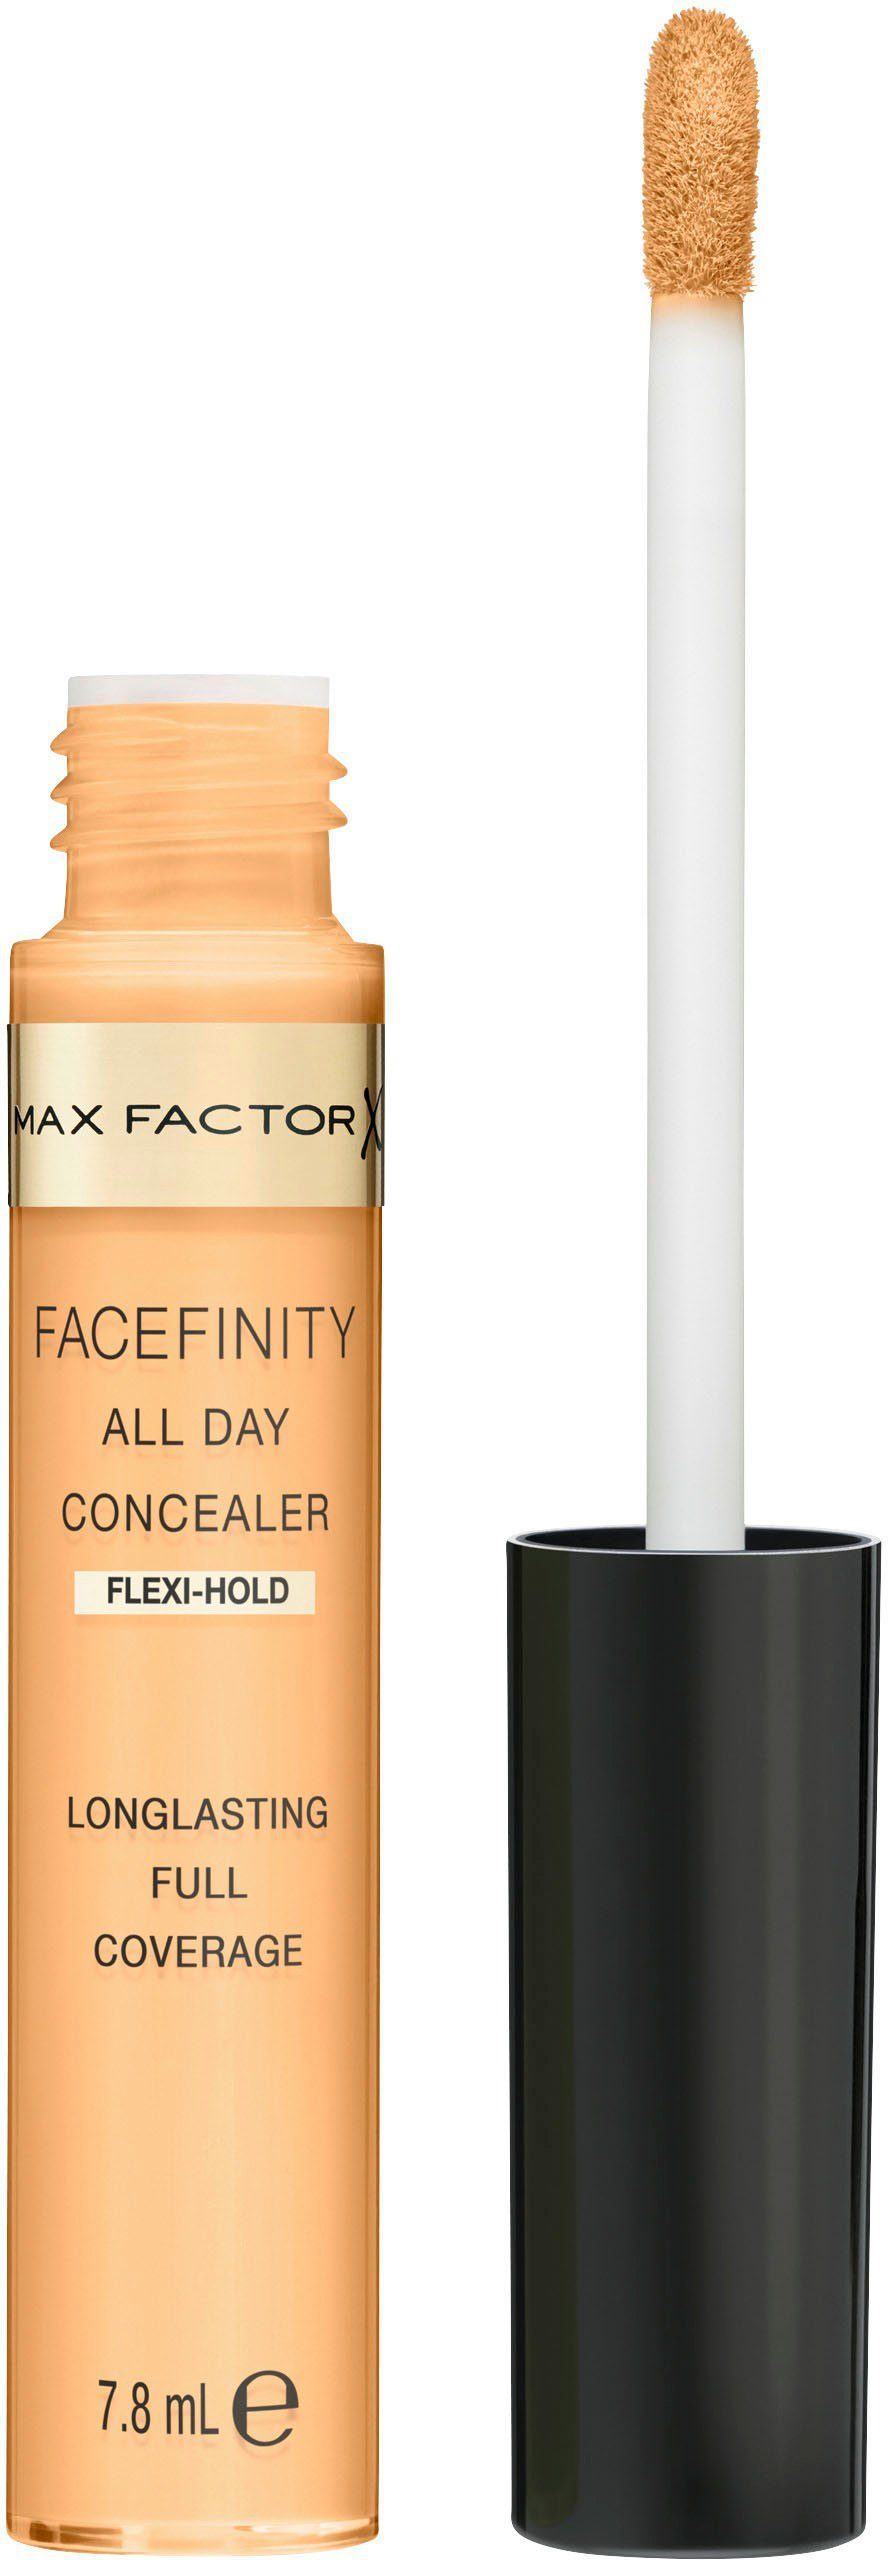 MAX FACTOR Concealer FACEFINITY 40 Flawless All Day